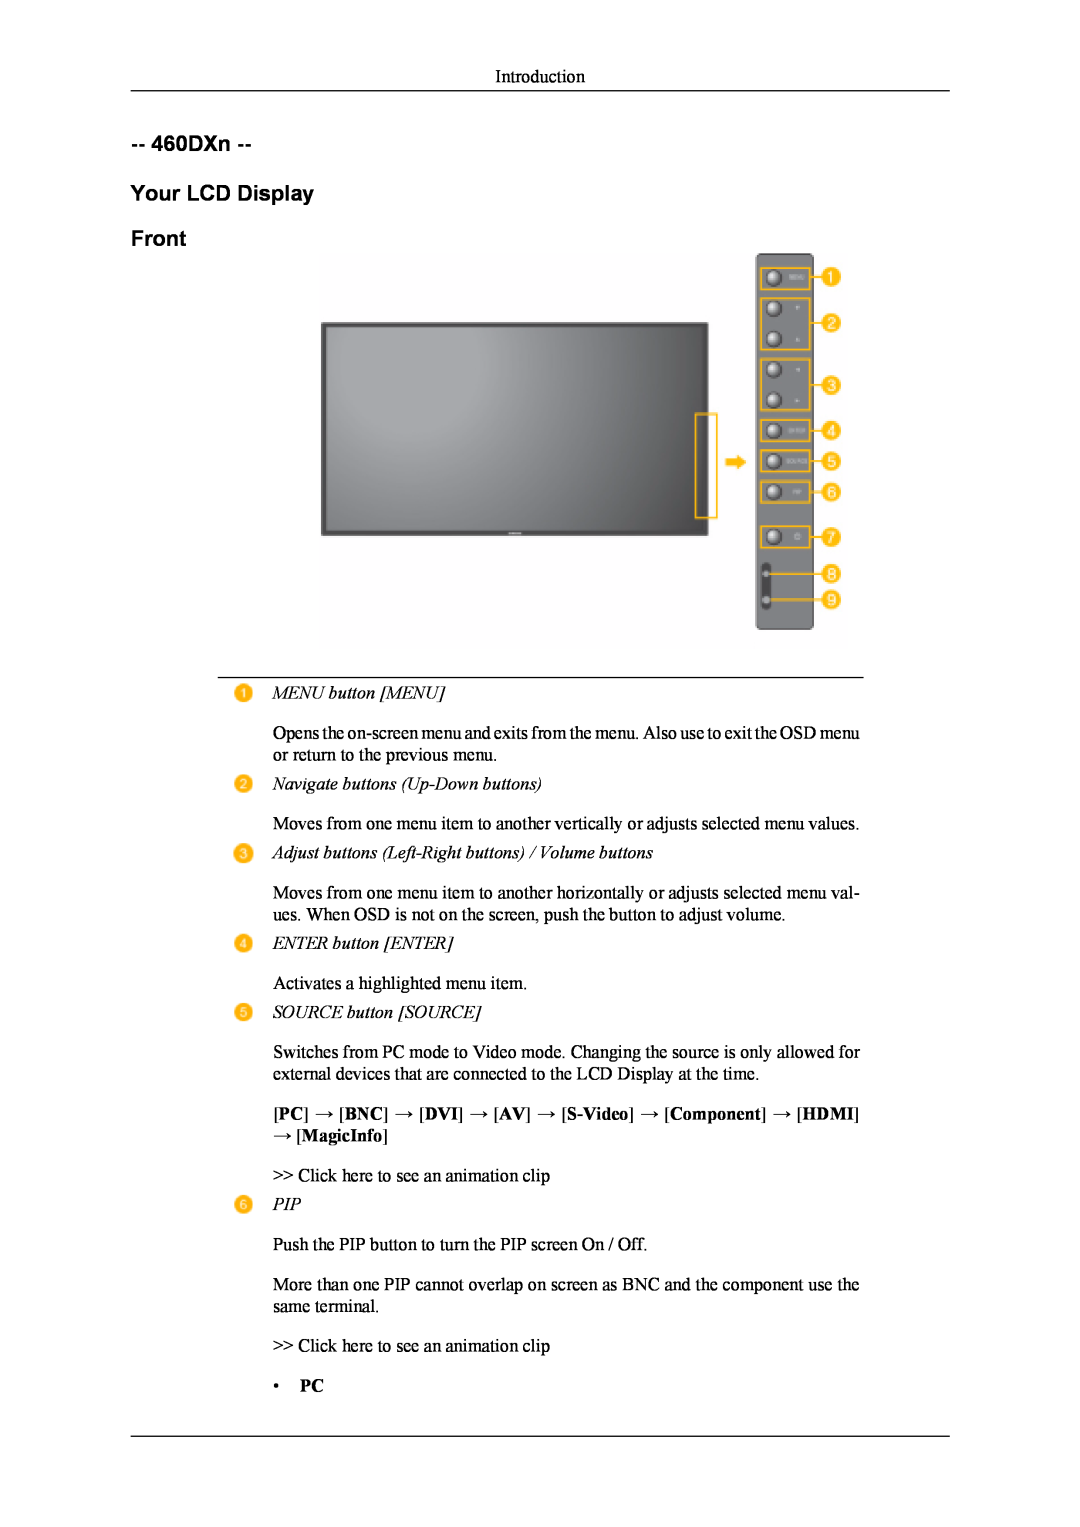 Samsung 400UXn user manual 460DXn Your LCD Display Front, → MagicInfo 